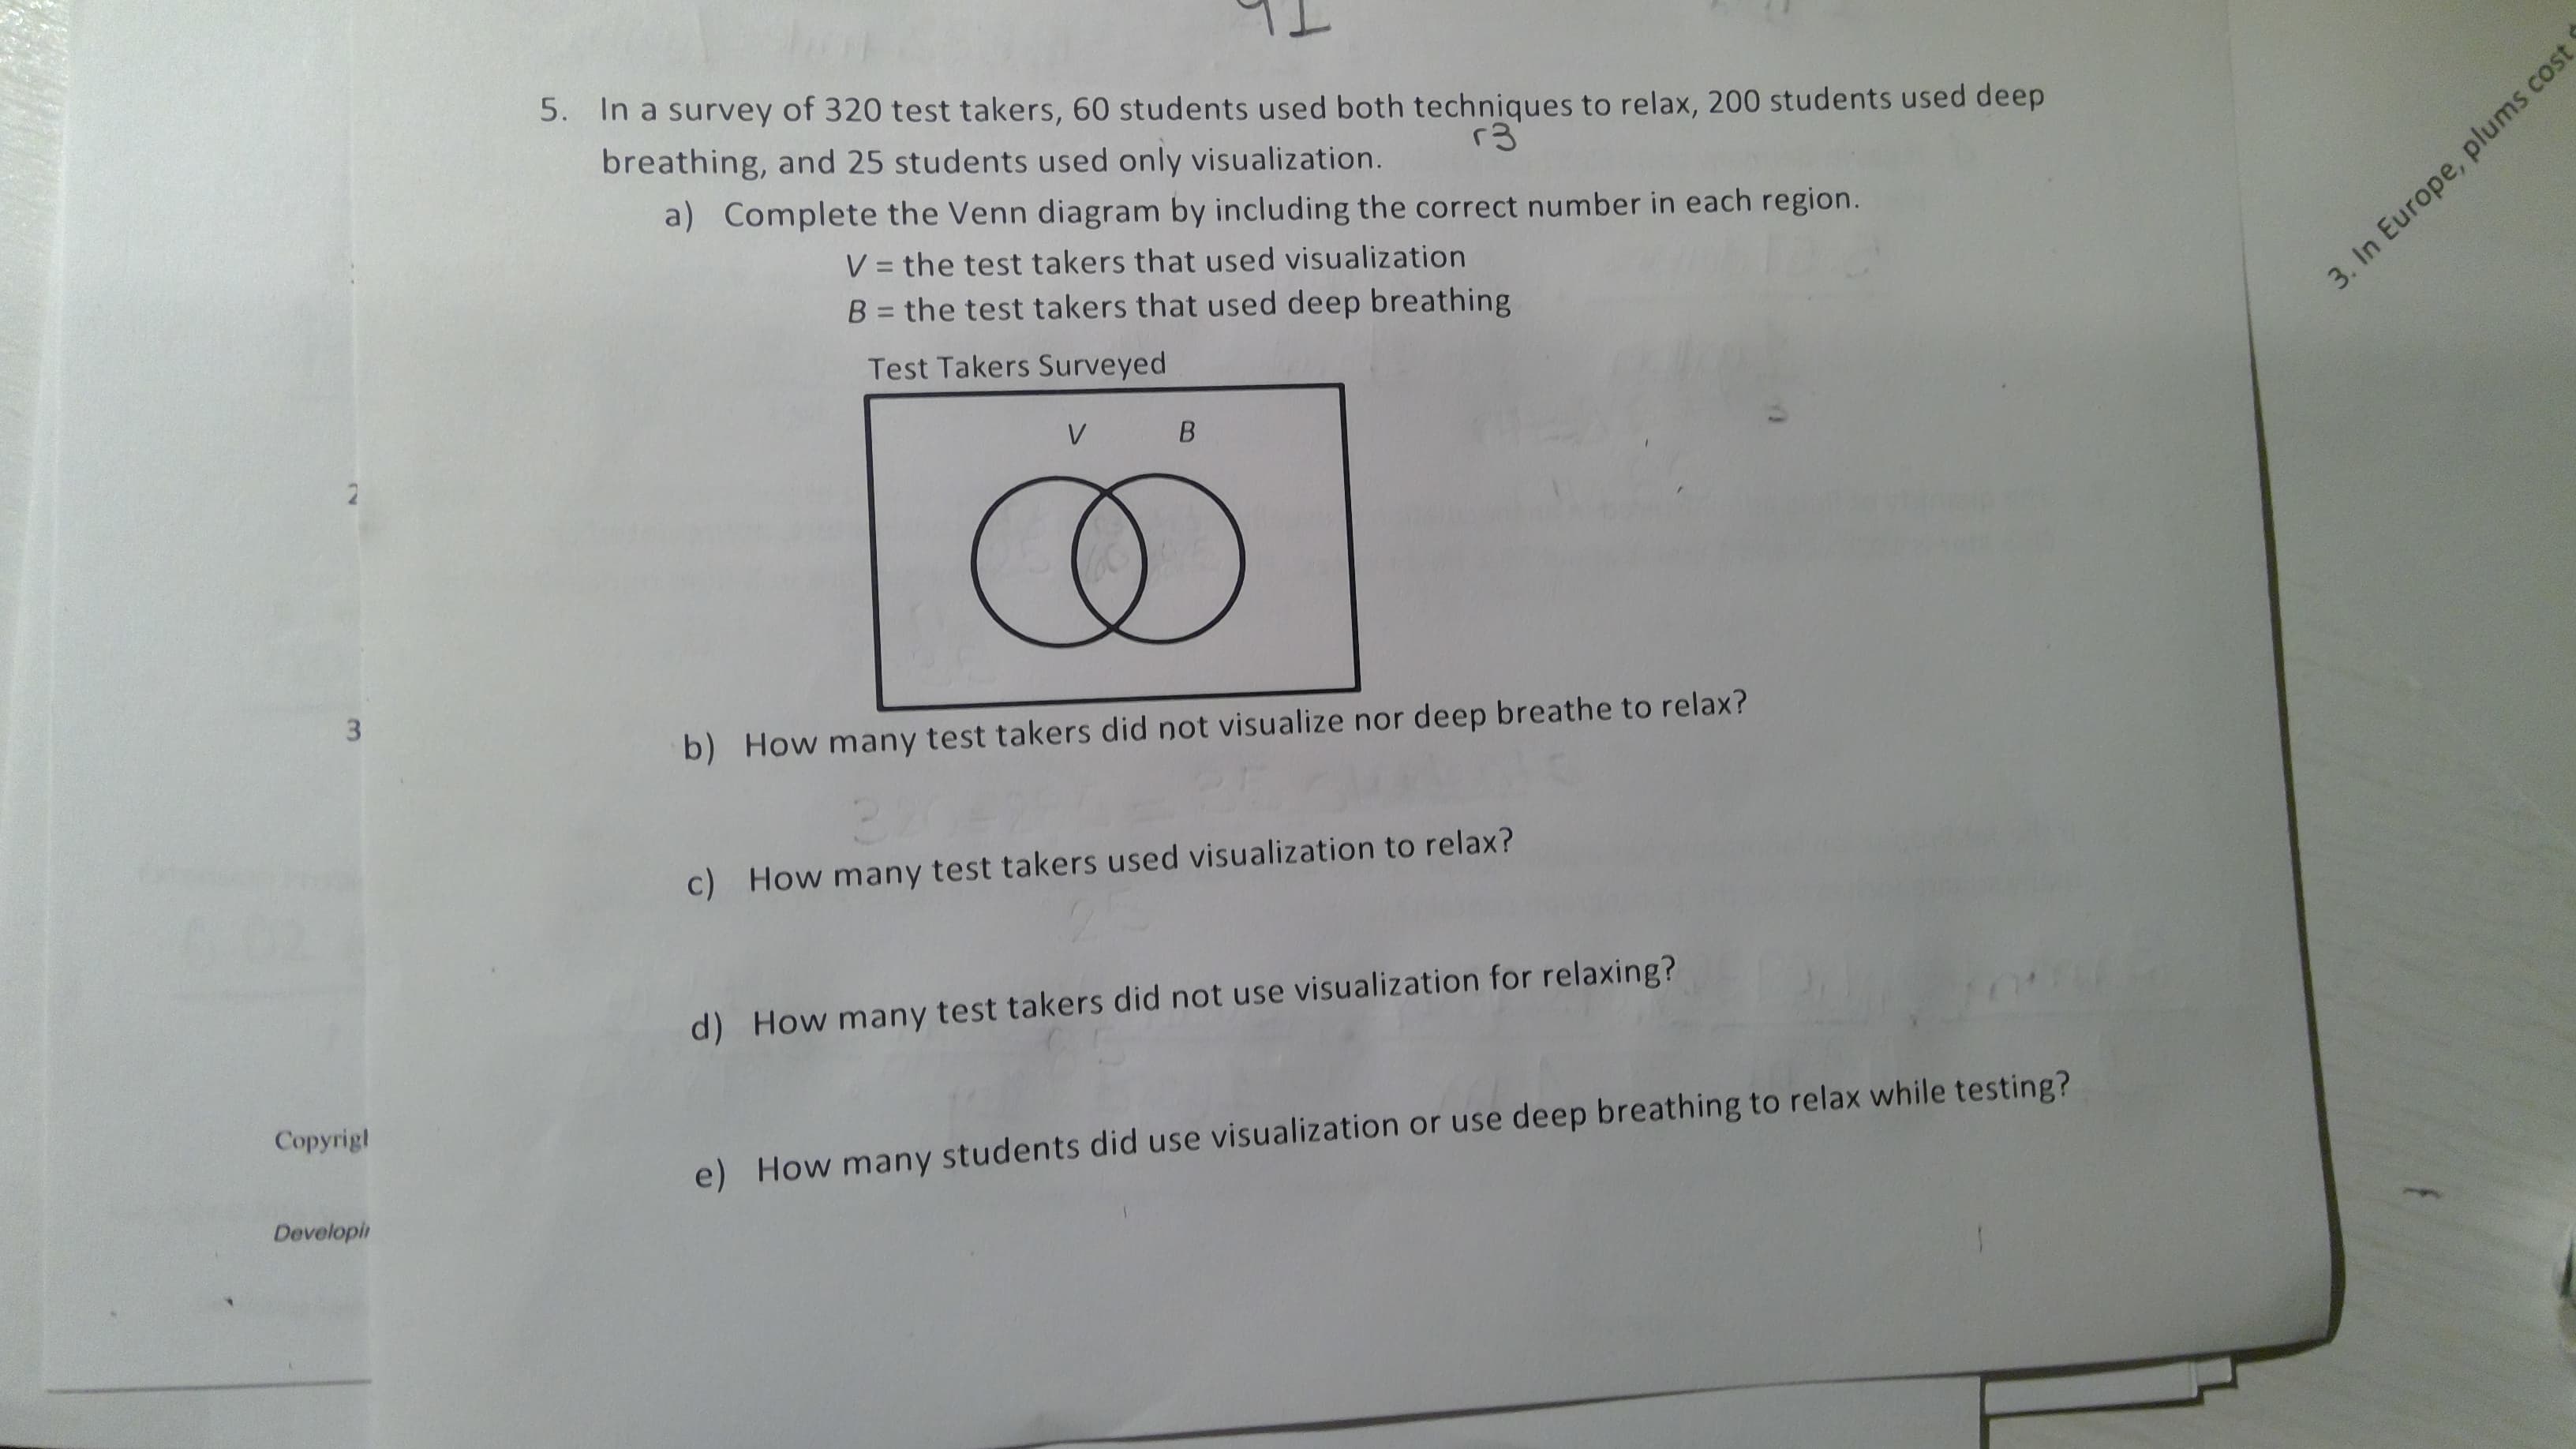 5.
In a survey of 320 test takers, 60 students used both techniques to relax, 200 students used deep
breathing, and 25 students used only visualization.
a) Complete the Venn diagram by including the correct number in each region.
V = the test takers that used visualization
B = the test takers that used deep breathing
Test Takers Surveyed
3. In Europe, plums cost
V
B
2
3
b) How many test takers did not visualize nor deep breathe to relax?
c)
How many test takers used visualization to relax?
d) How many test takers did not use visualization for relaxing?
Сopyrigl
e) How many students did use visualization or use deep breathing to relax while testing?
Developi
